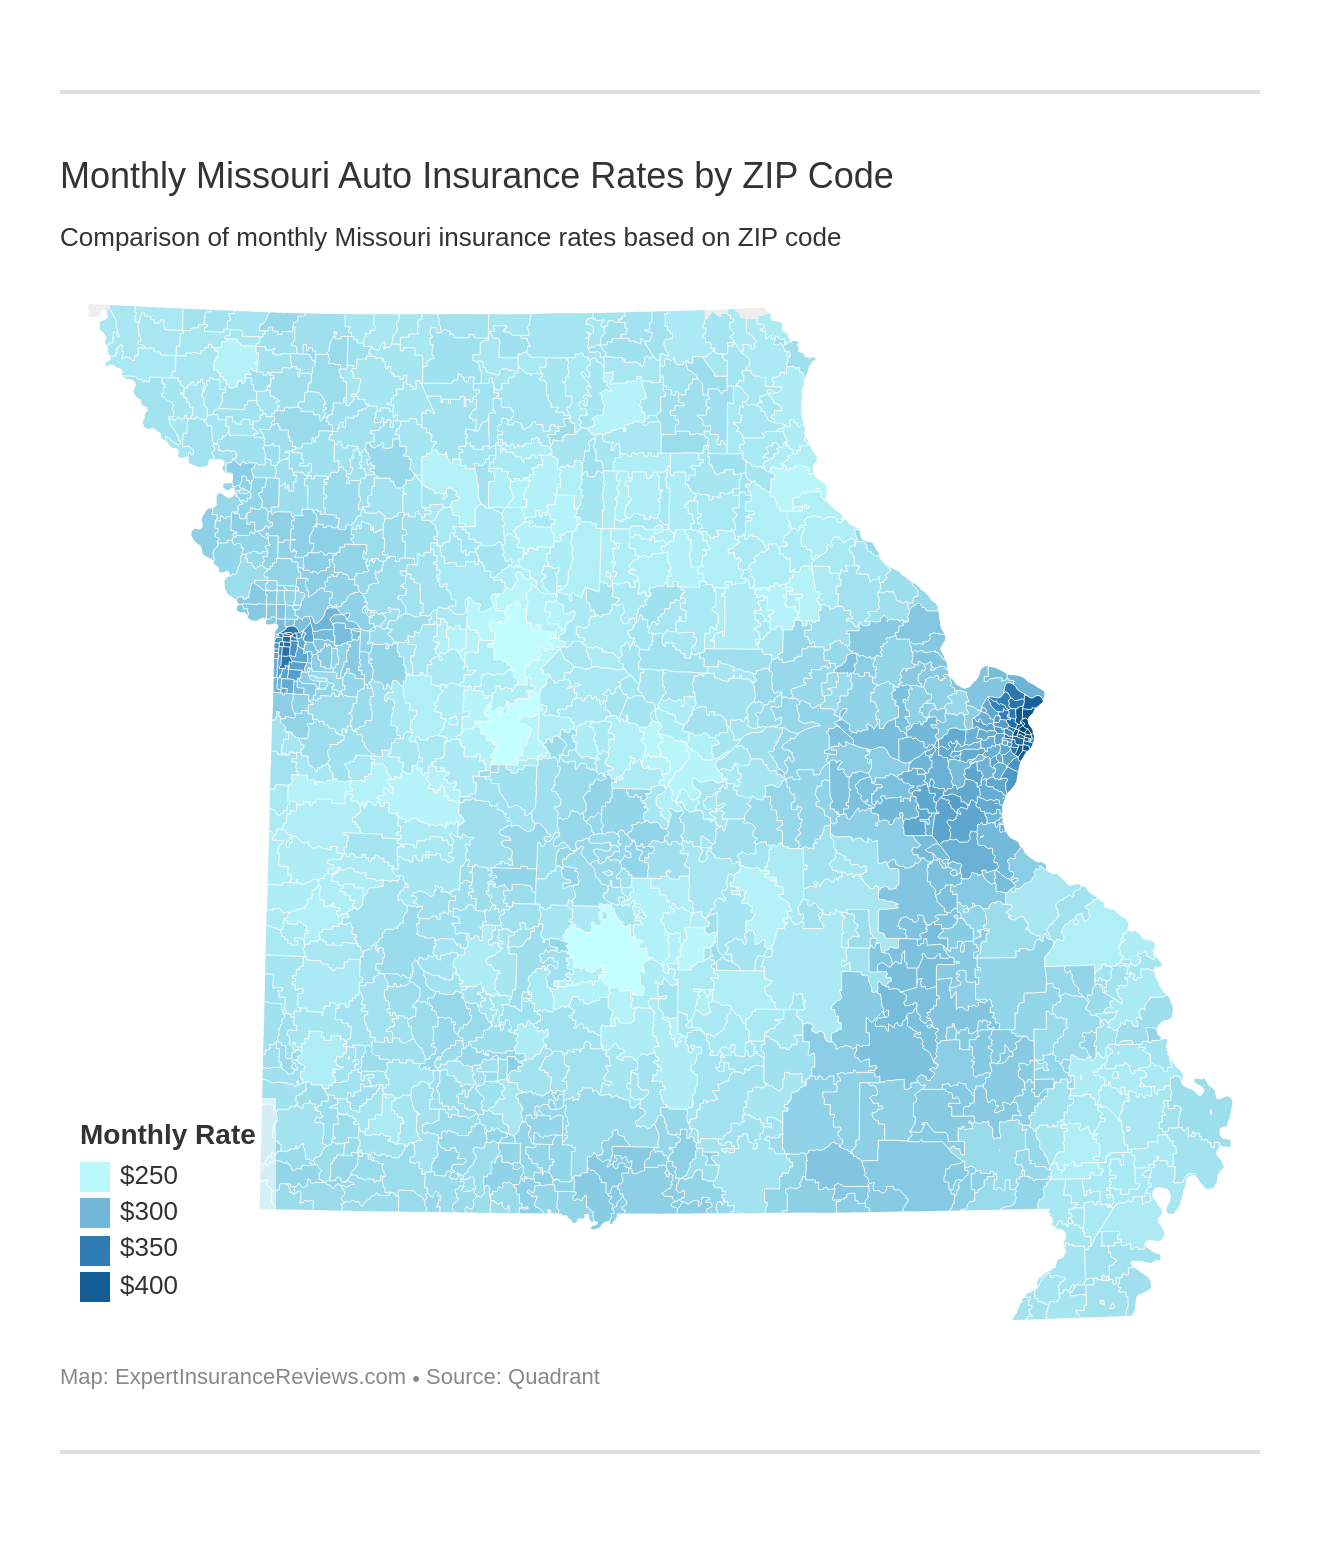 Monthly Missouri Auto Insurance Rates by ZIP Code